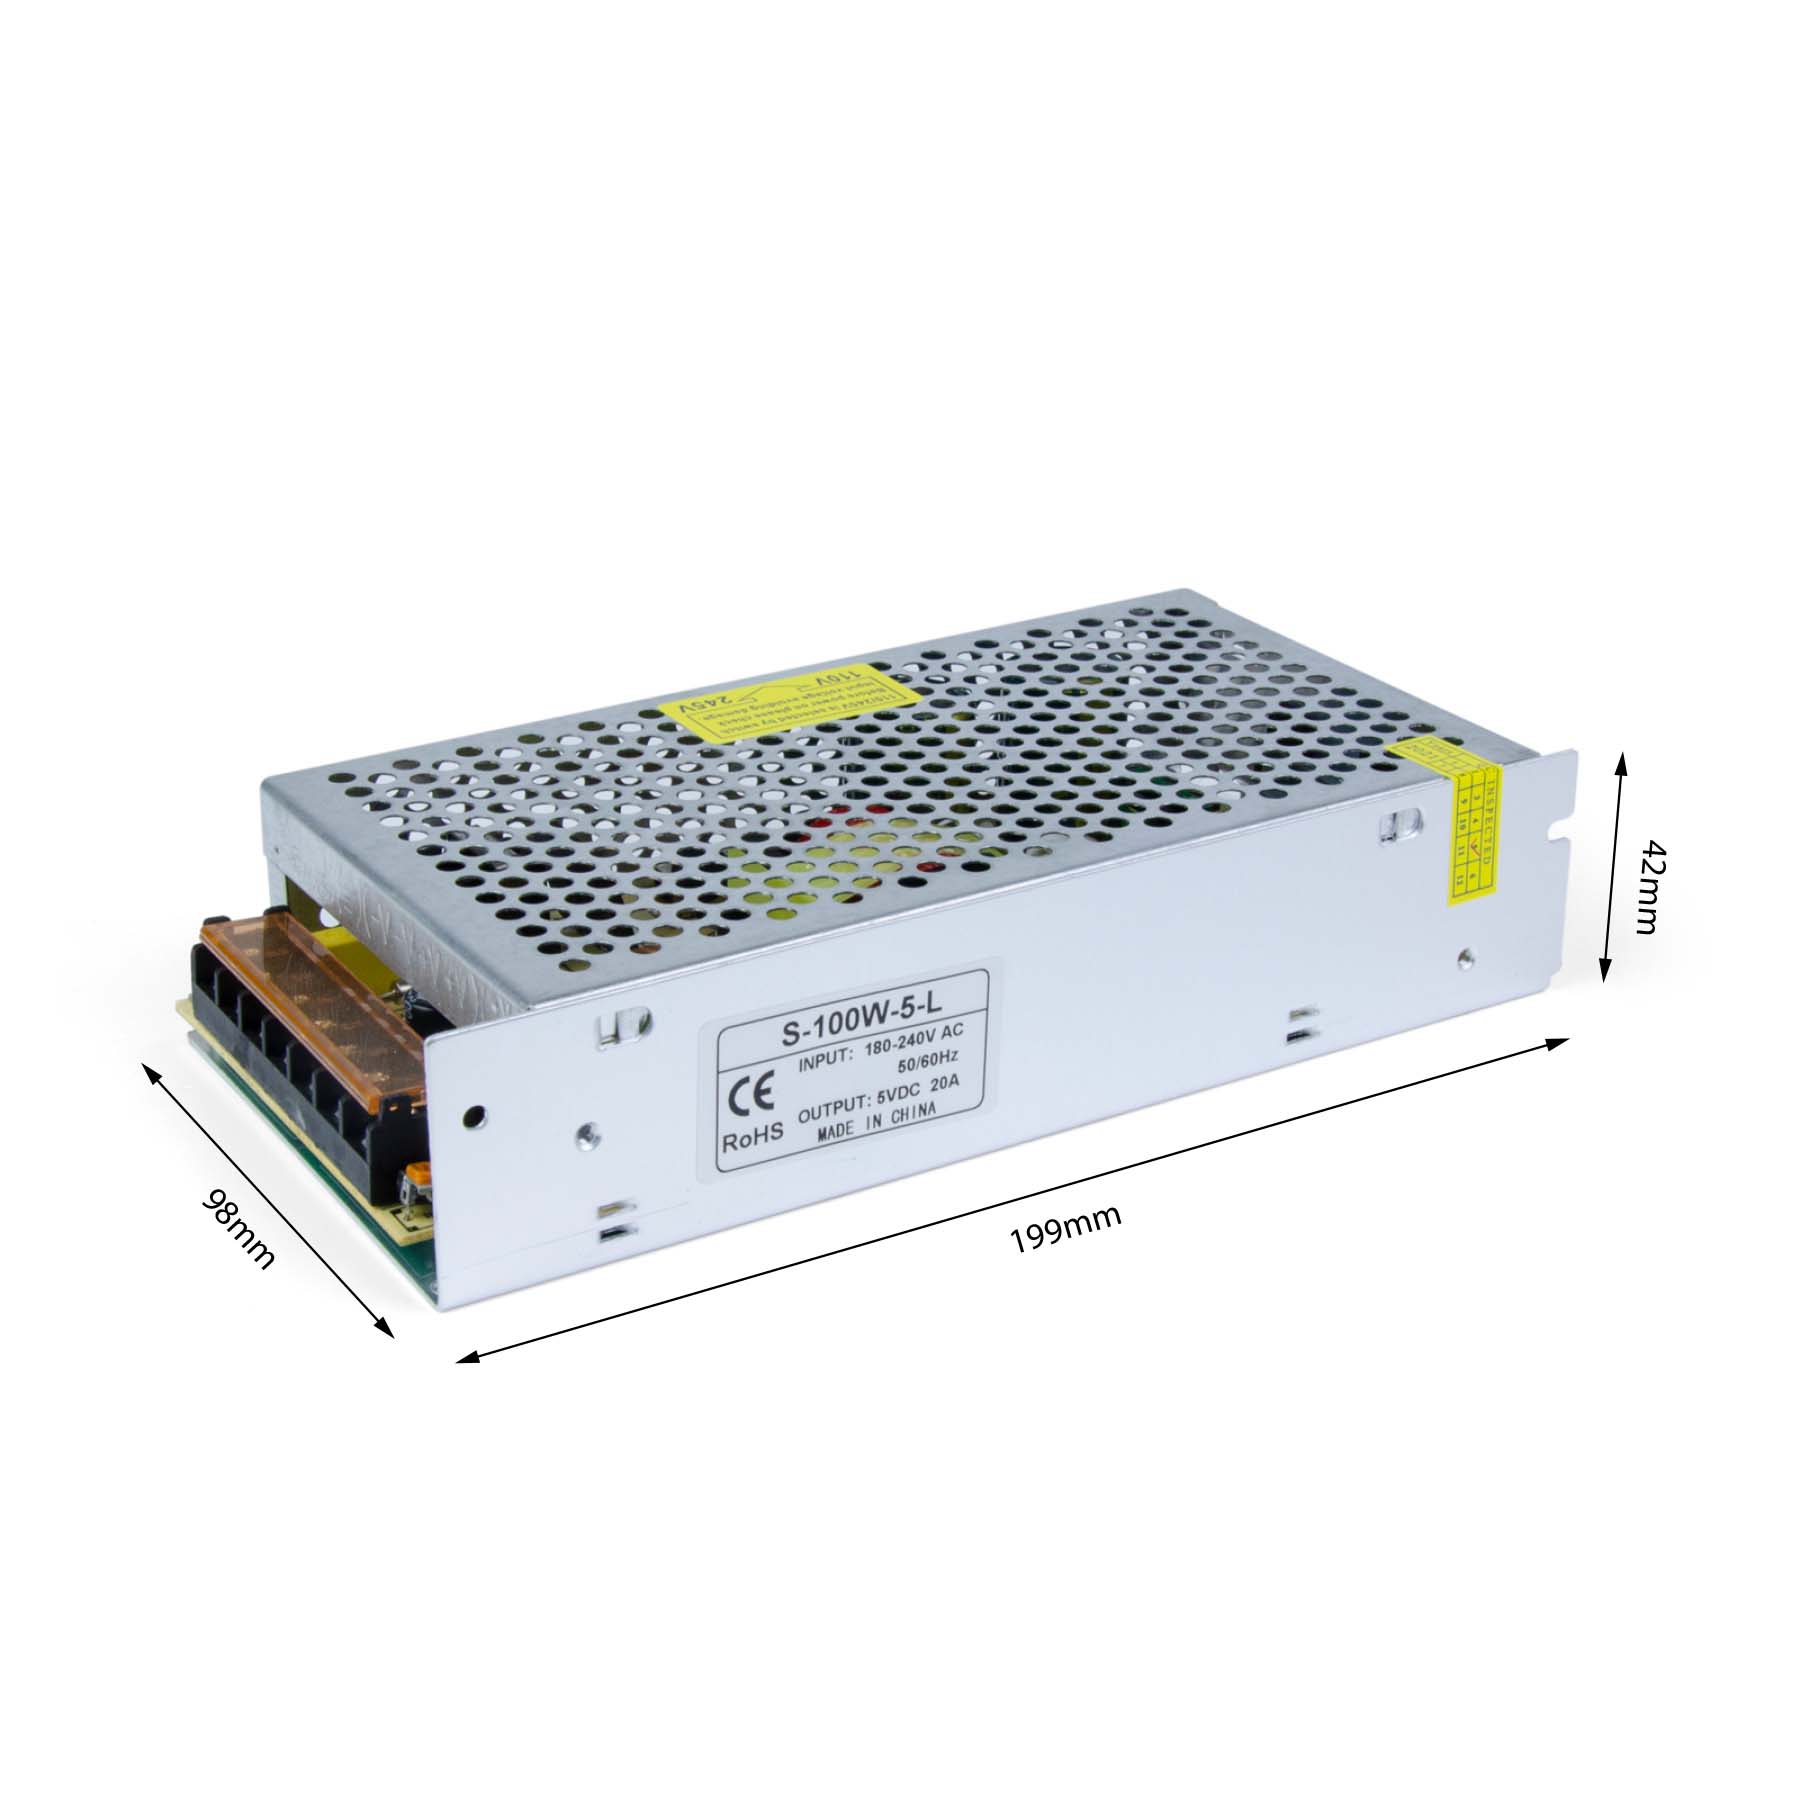 G.W.S LED Wholesale LED Drivers/LED Power Supplies IP20 (Non-Waterproof) / 5V / 100W 5V 20A 100W LED Driver